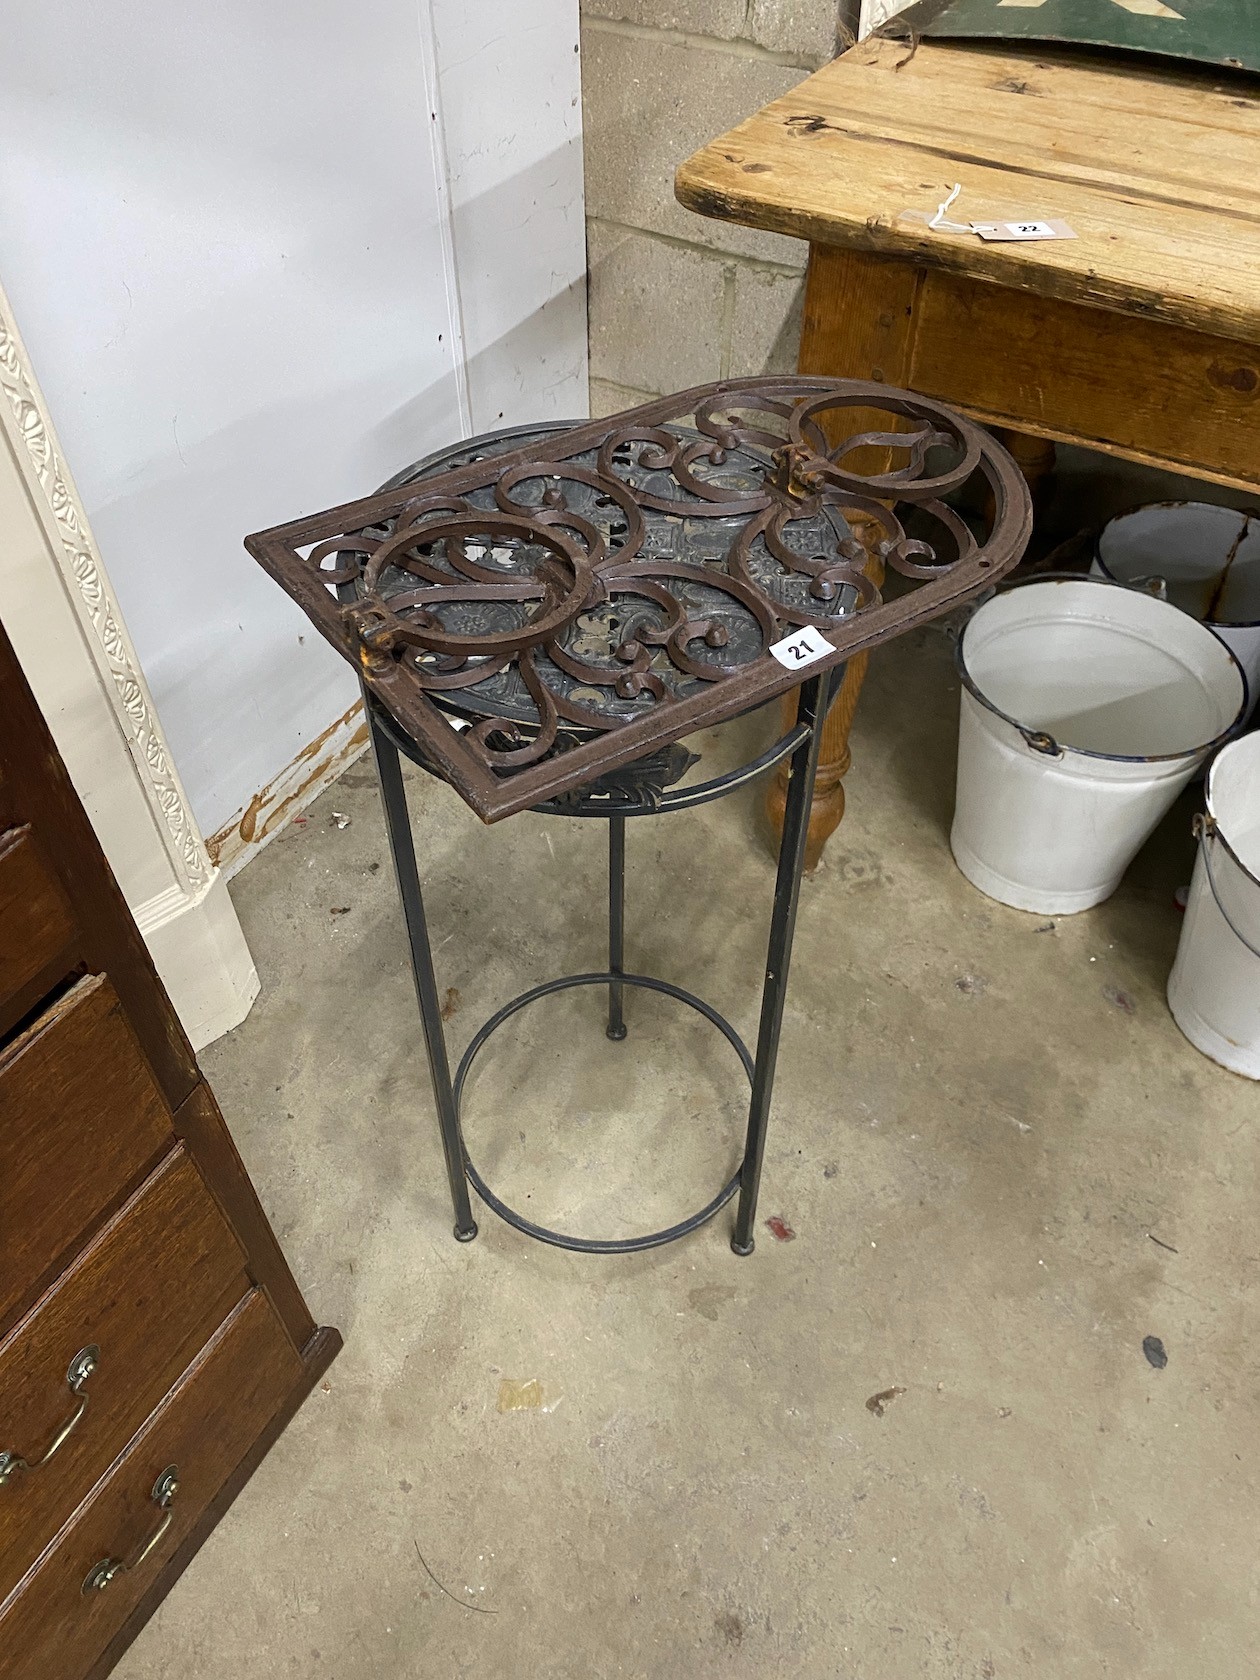 Three metal hanging baskets, a wall mounted pot holder and a stand